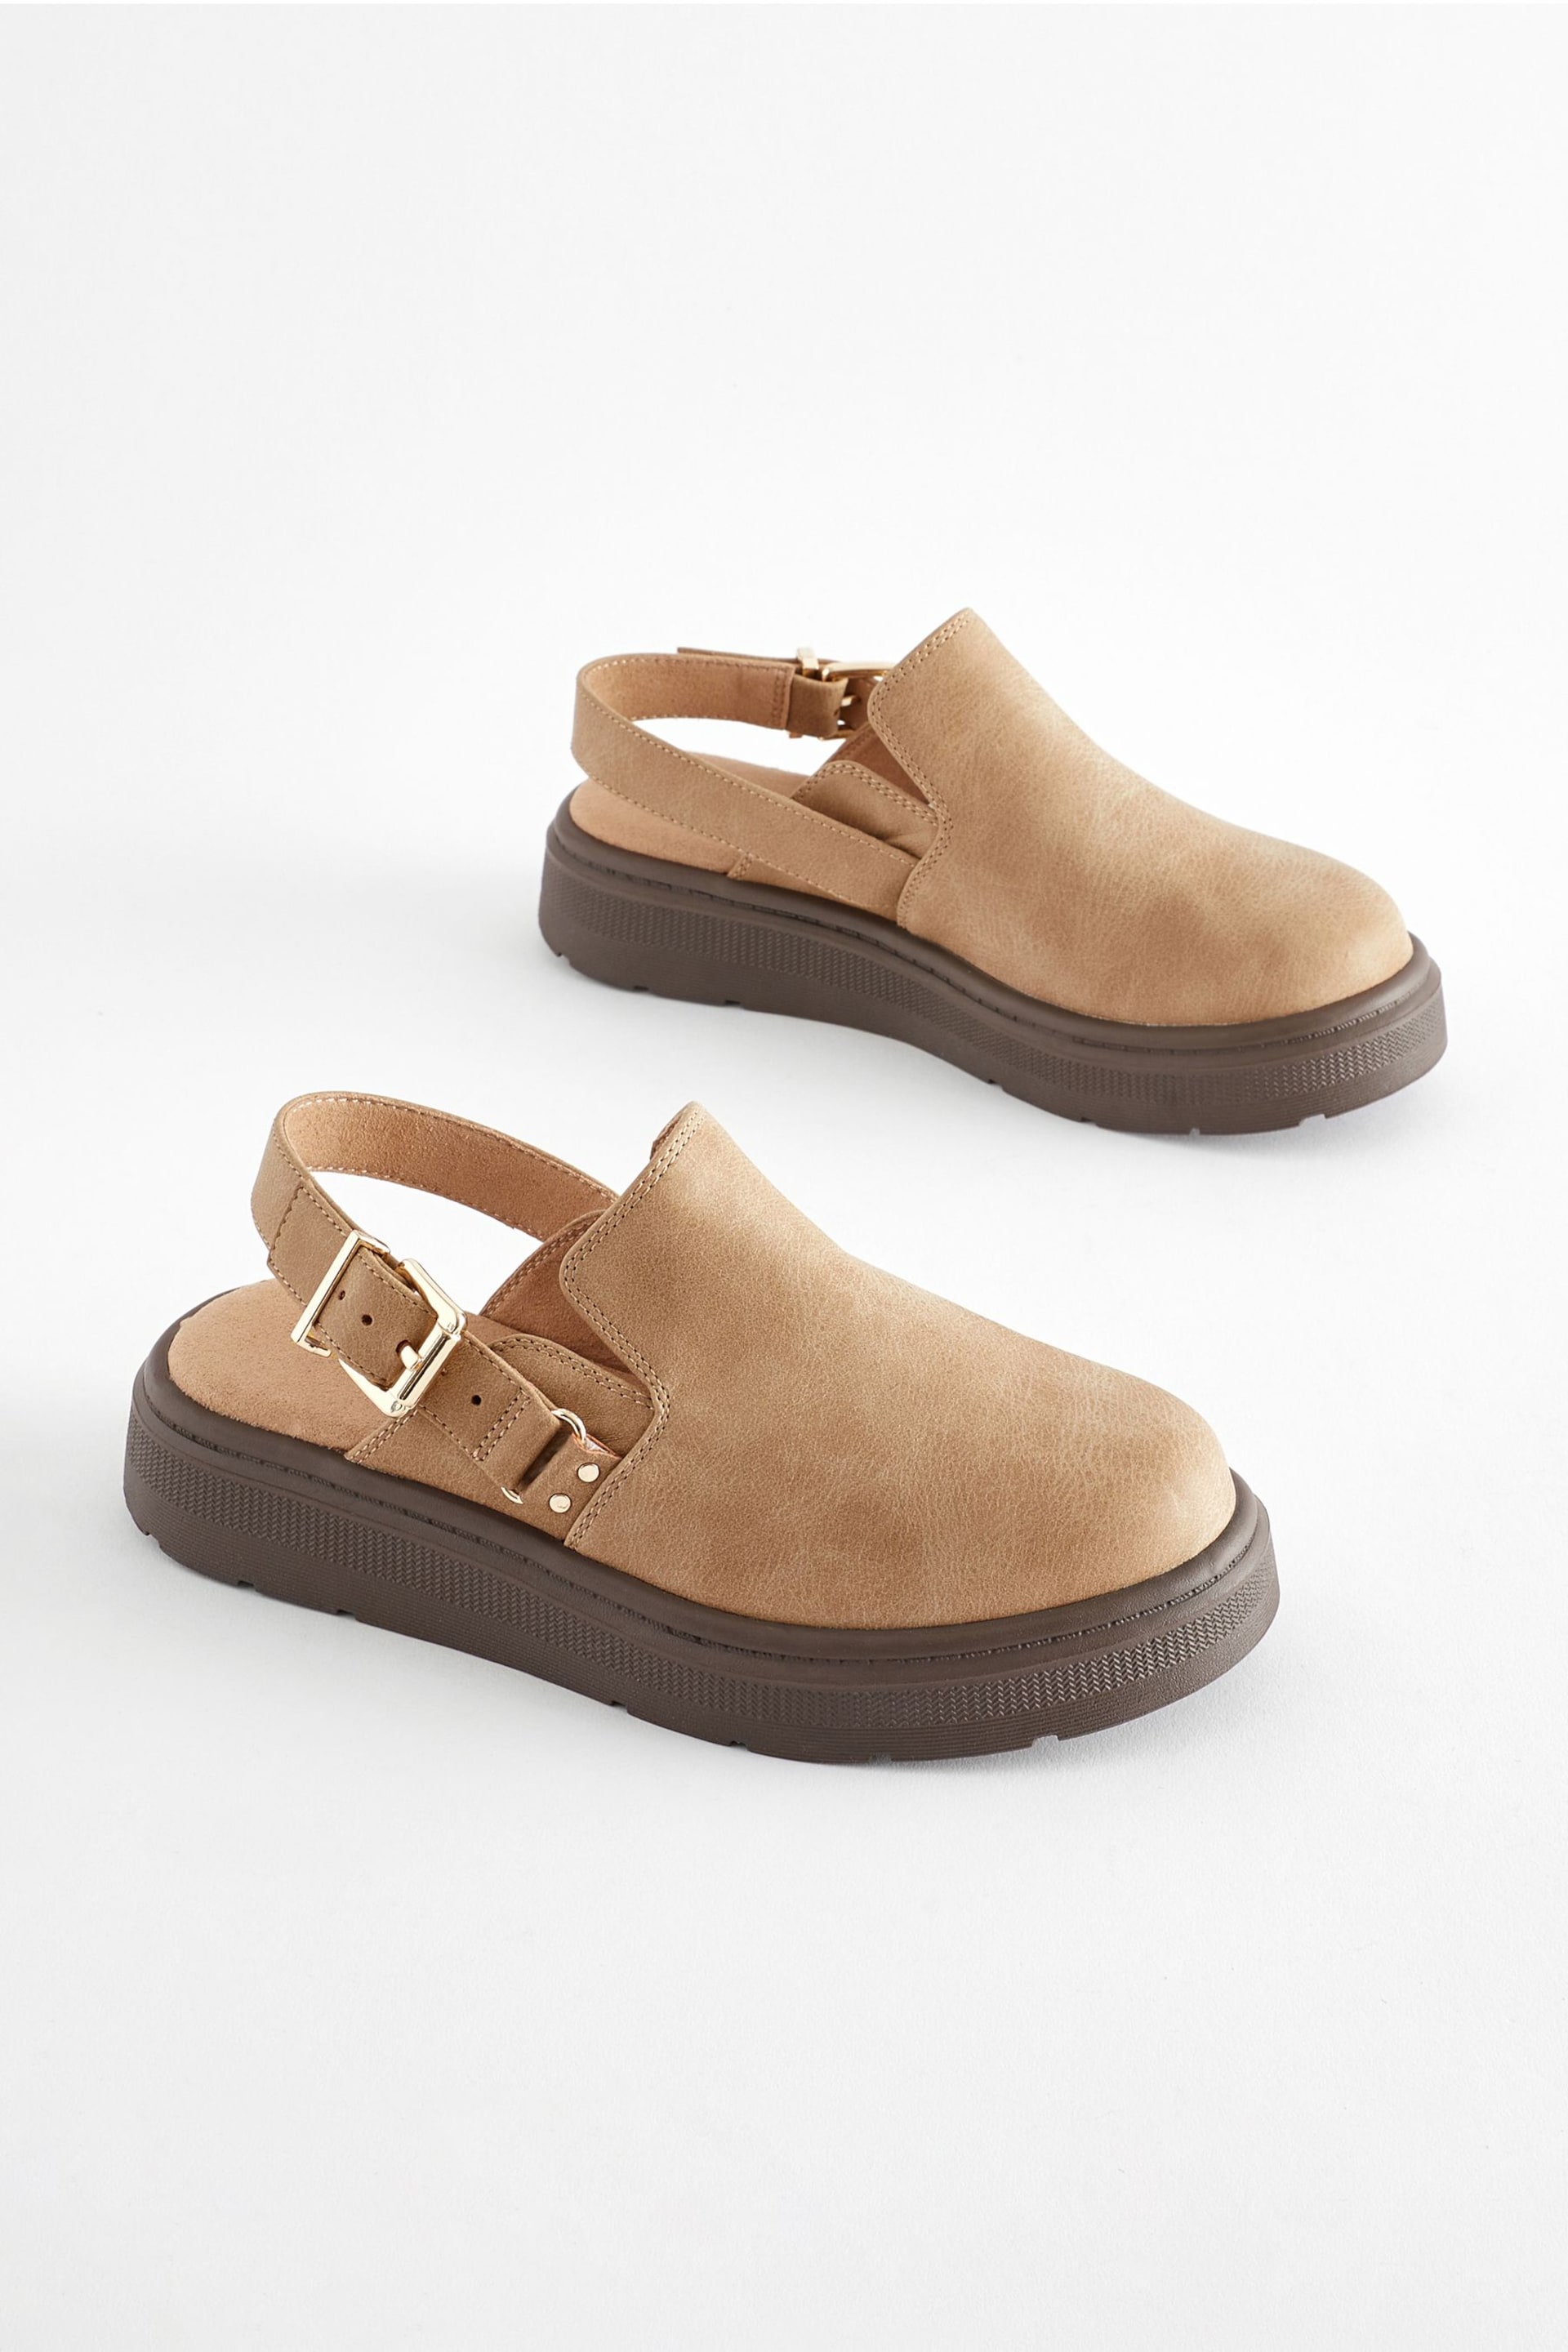 Neutral Beige Chunky Clogs - Image 1 of 6